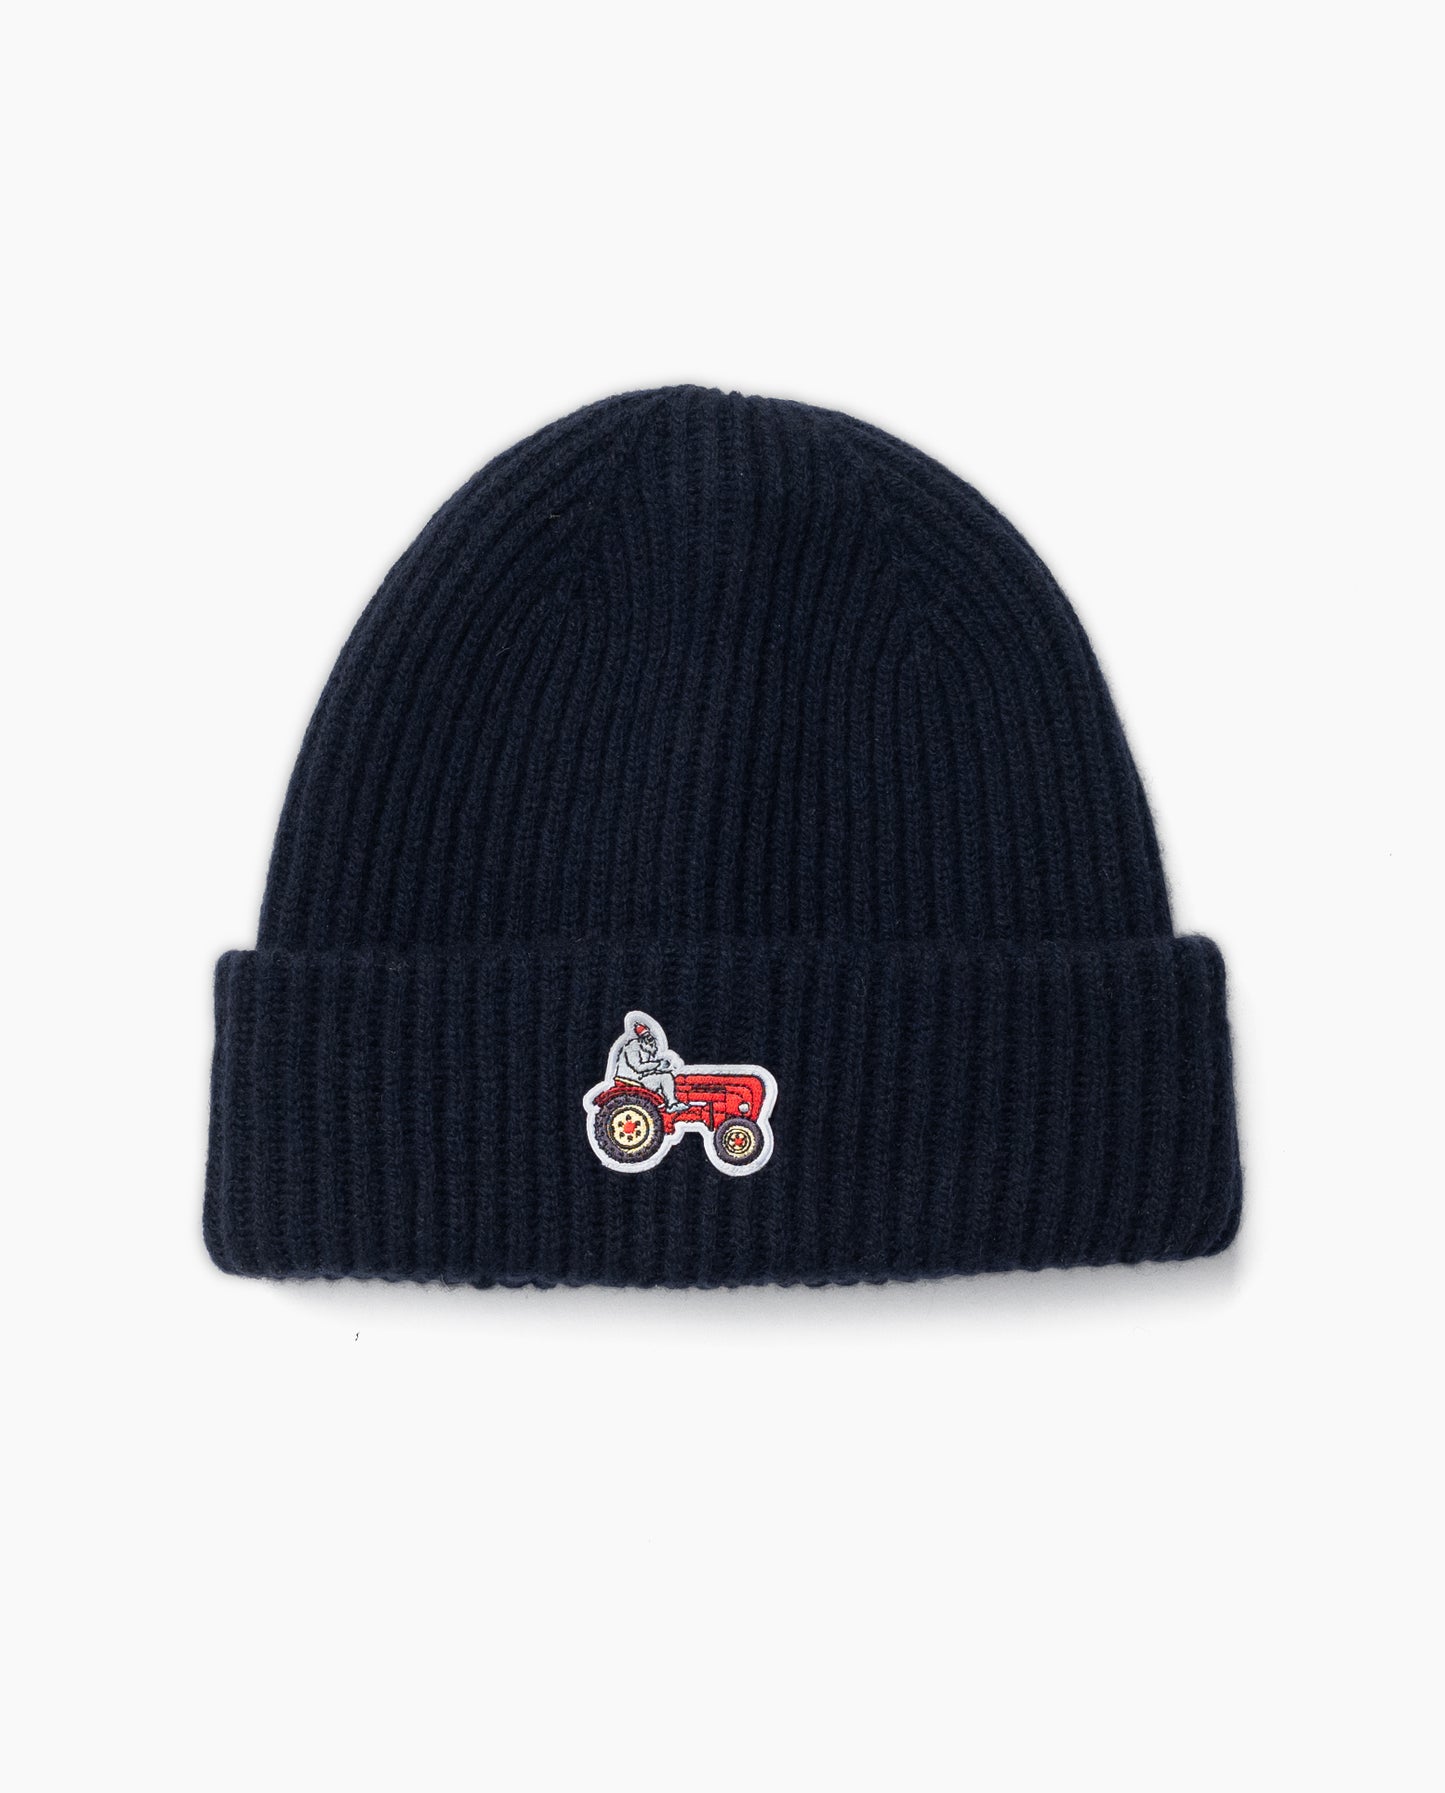 The Yeti on Tractor Beanie